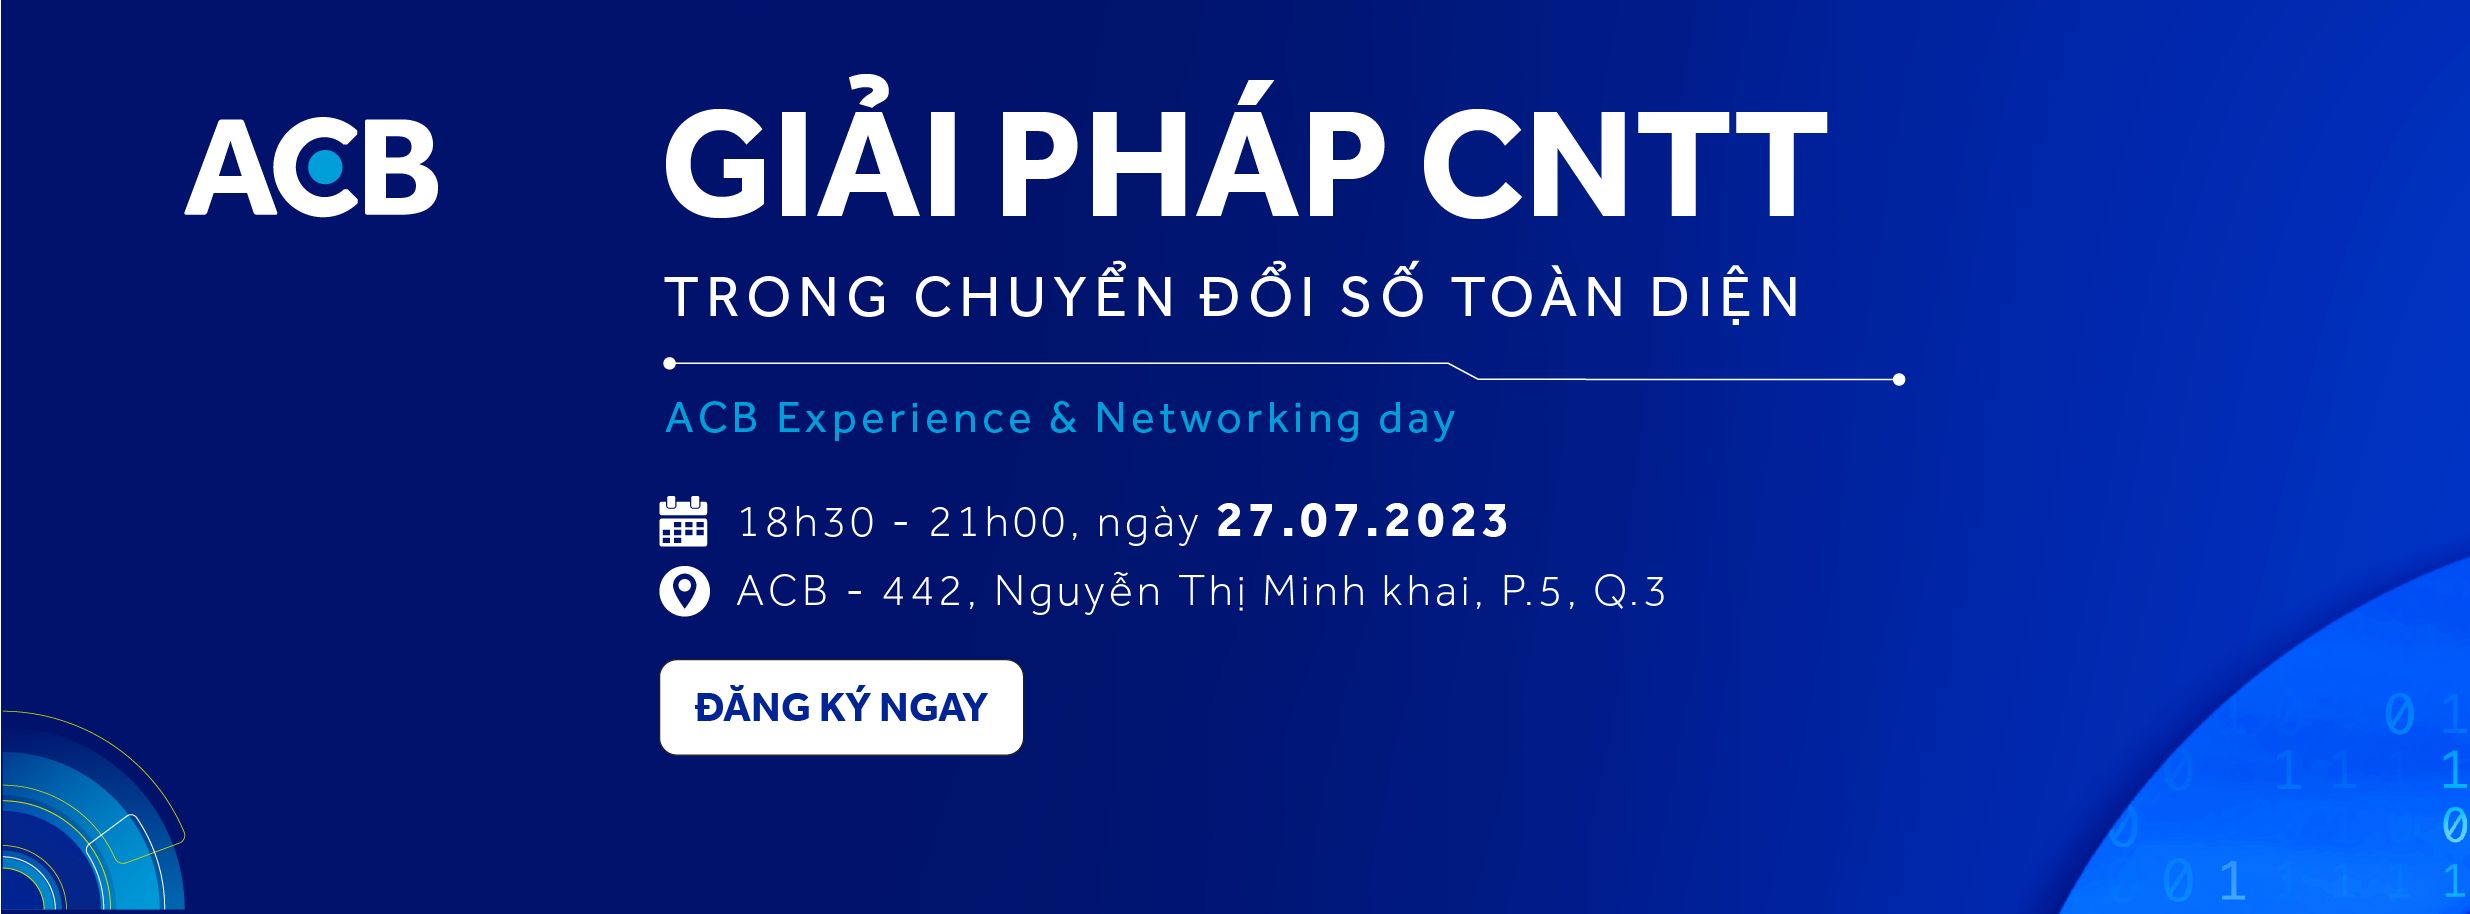 27.07.23 | THAM GIA NGAY SỰ KIỆN ACB EXPERIENCE & NETWORKING DAY